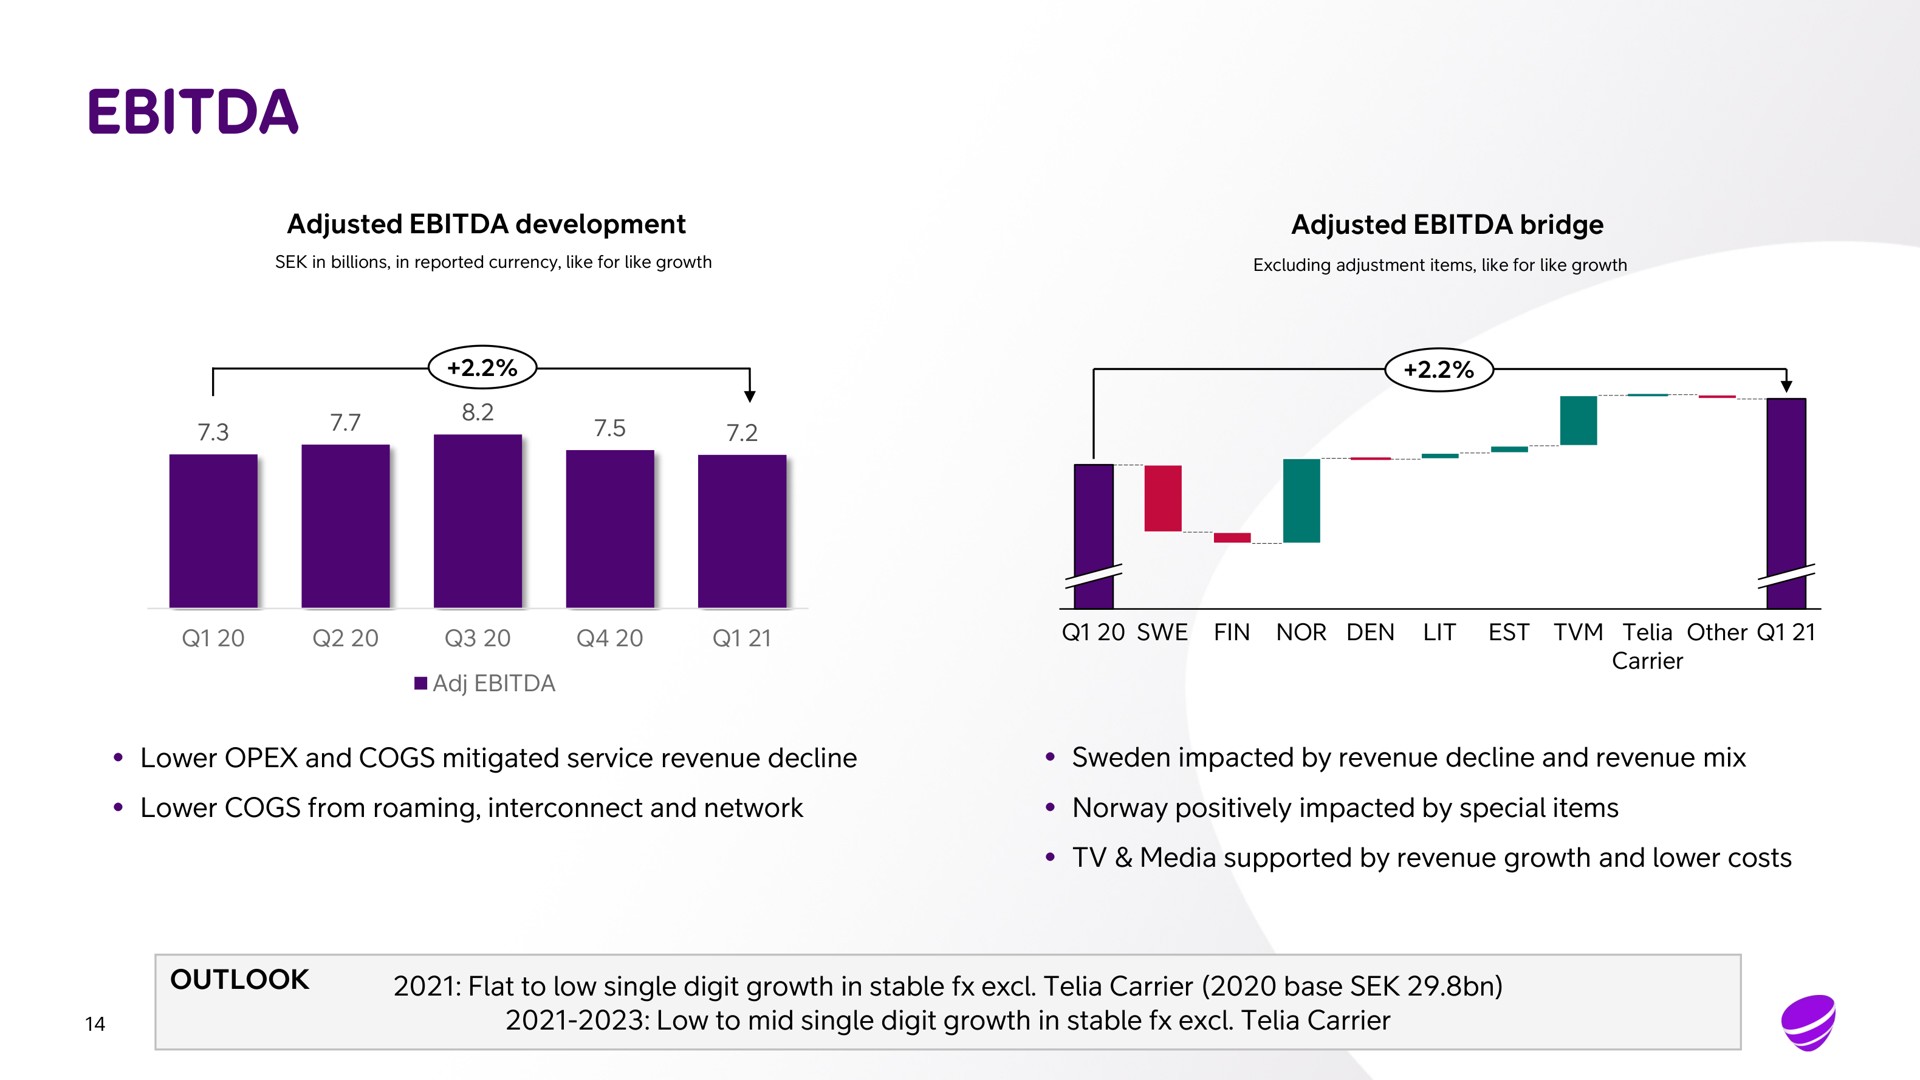 adjusted development adjusted bridge lower and cogs mitigated service revenue decline impacted by revenue decline and revenue mix lower cogs from roaming interconnect and network positively impacted by special items media supported by revenue growth and lower costs outlook flat to low single digit growth in stable carrier base low to mid single digit growth in stable carrier | Telia Company